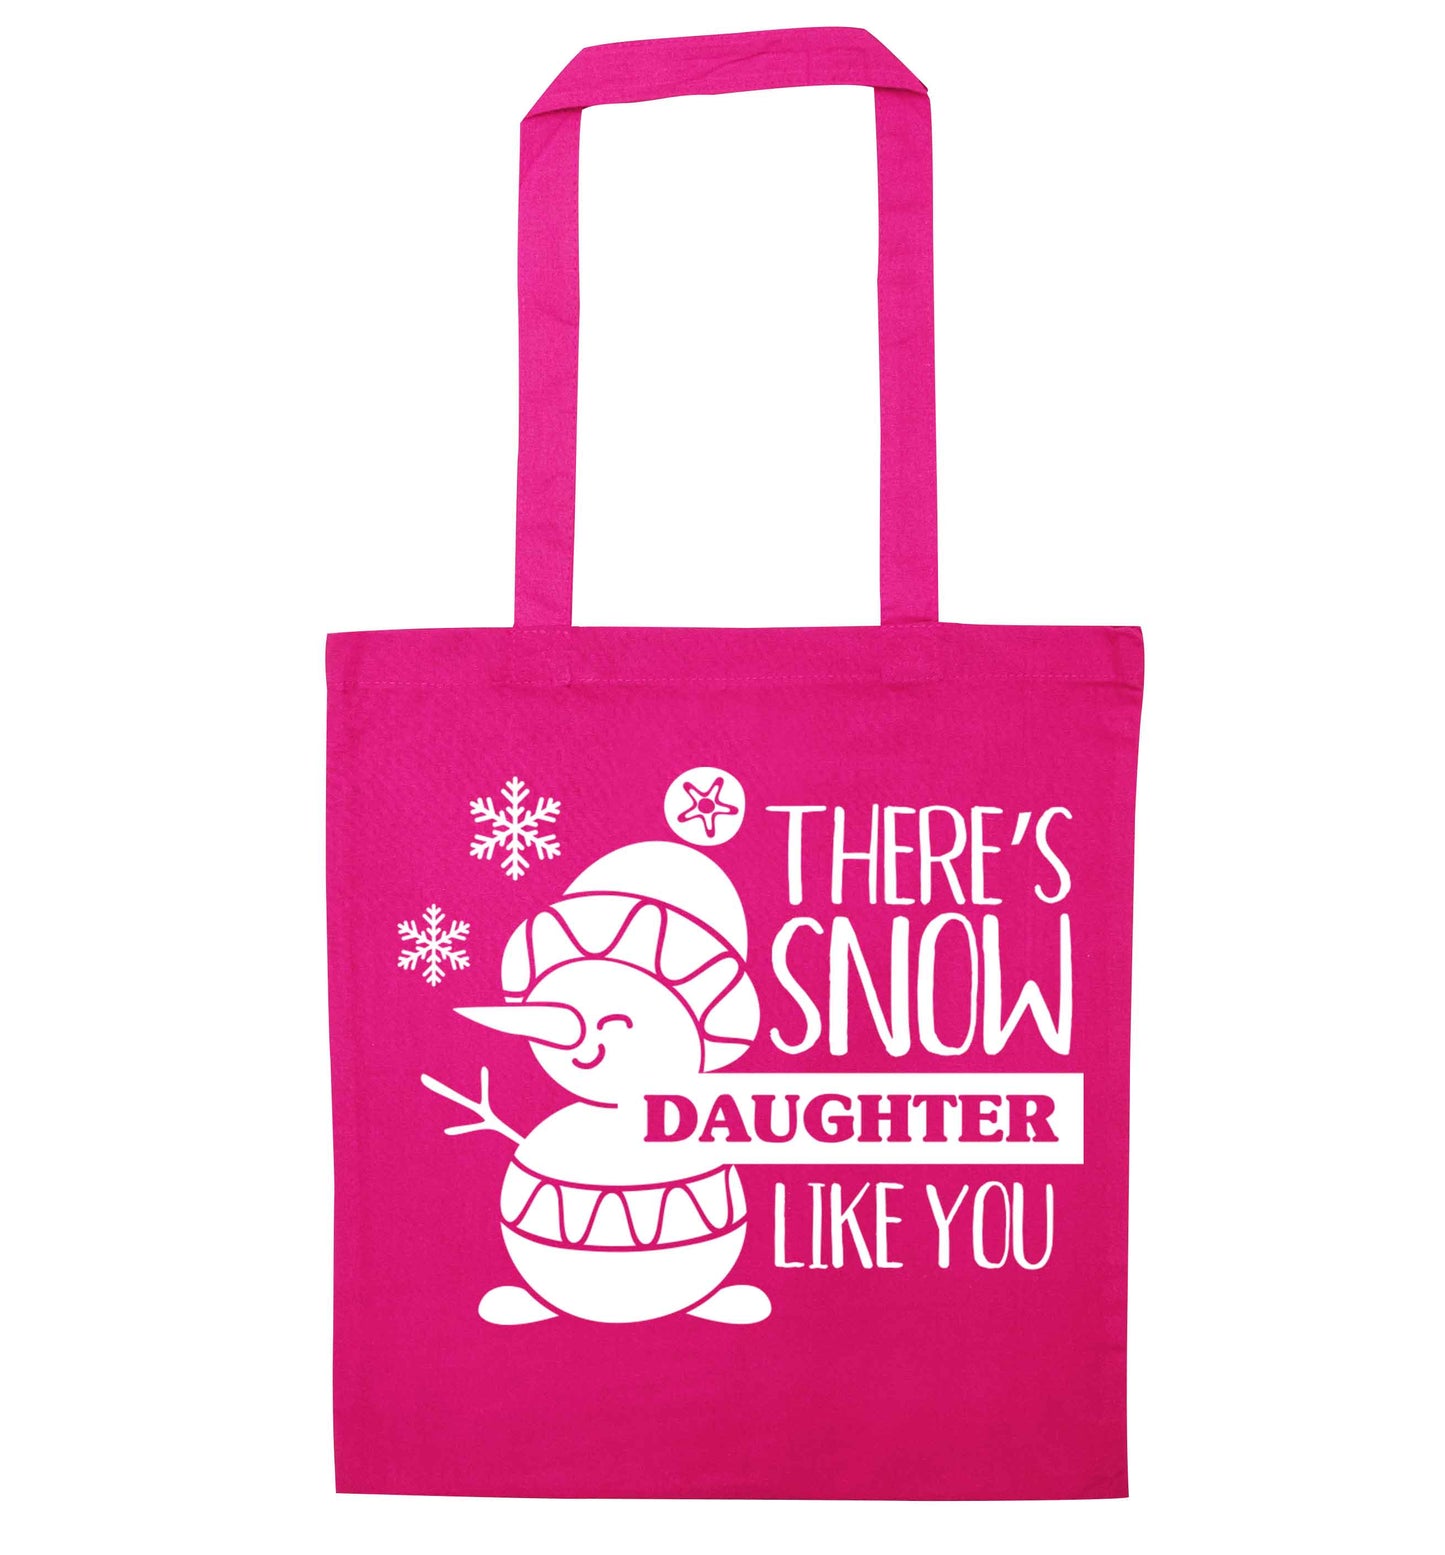 There's snow daughter like you pink tote bag